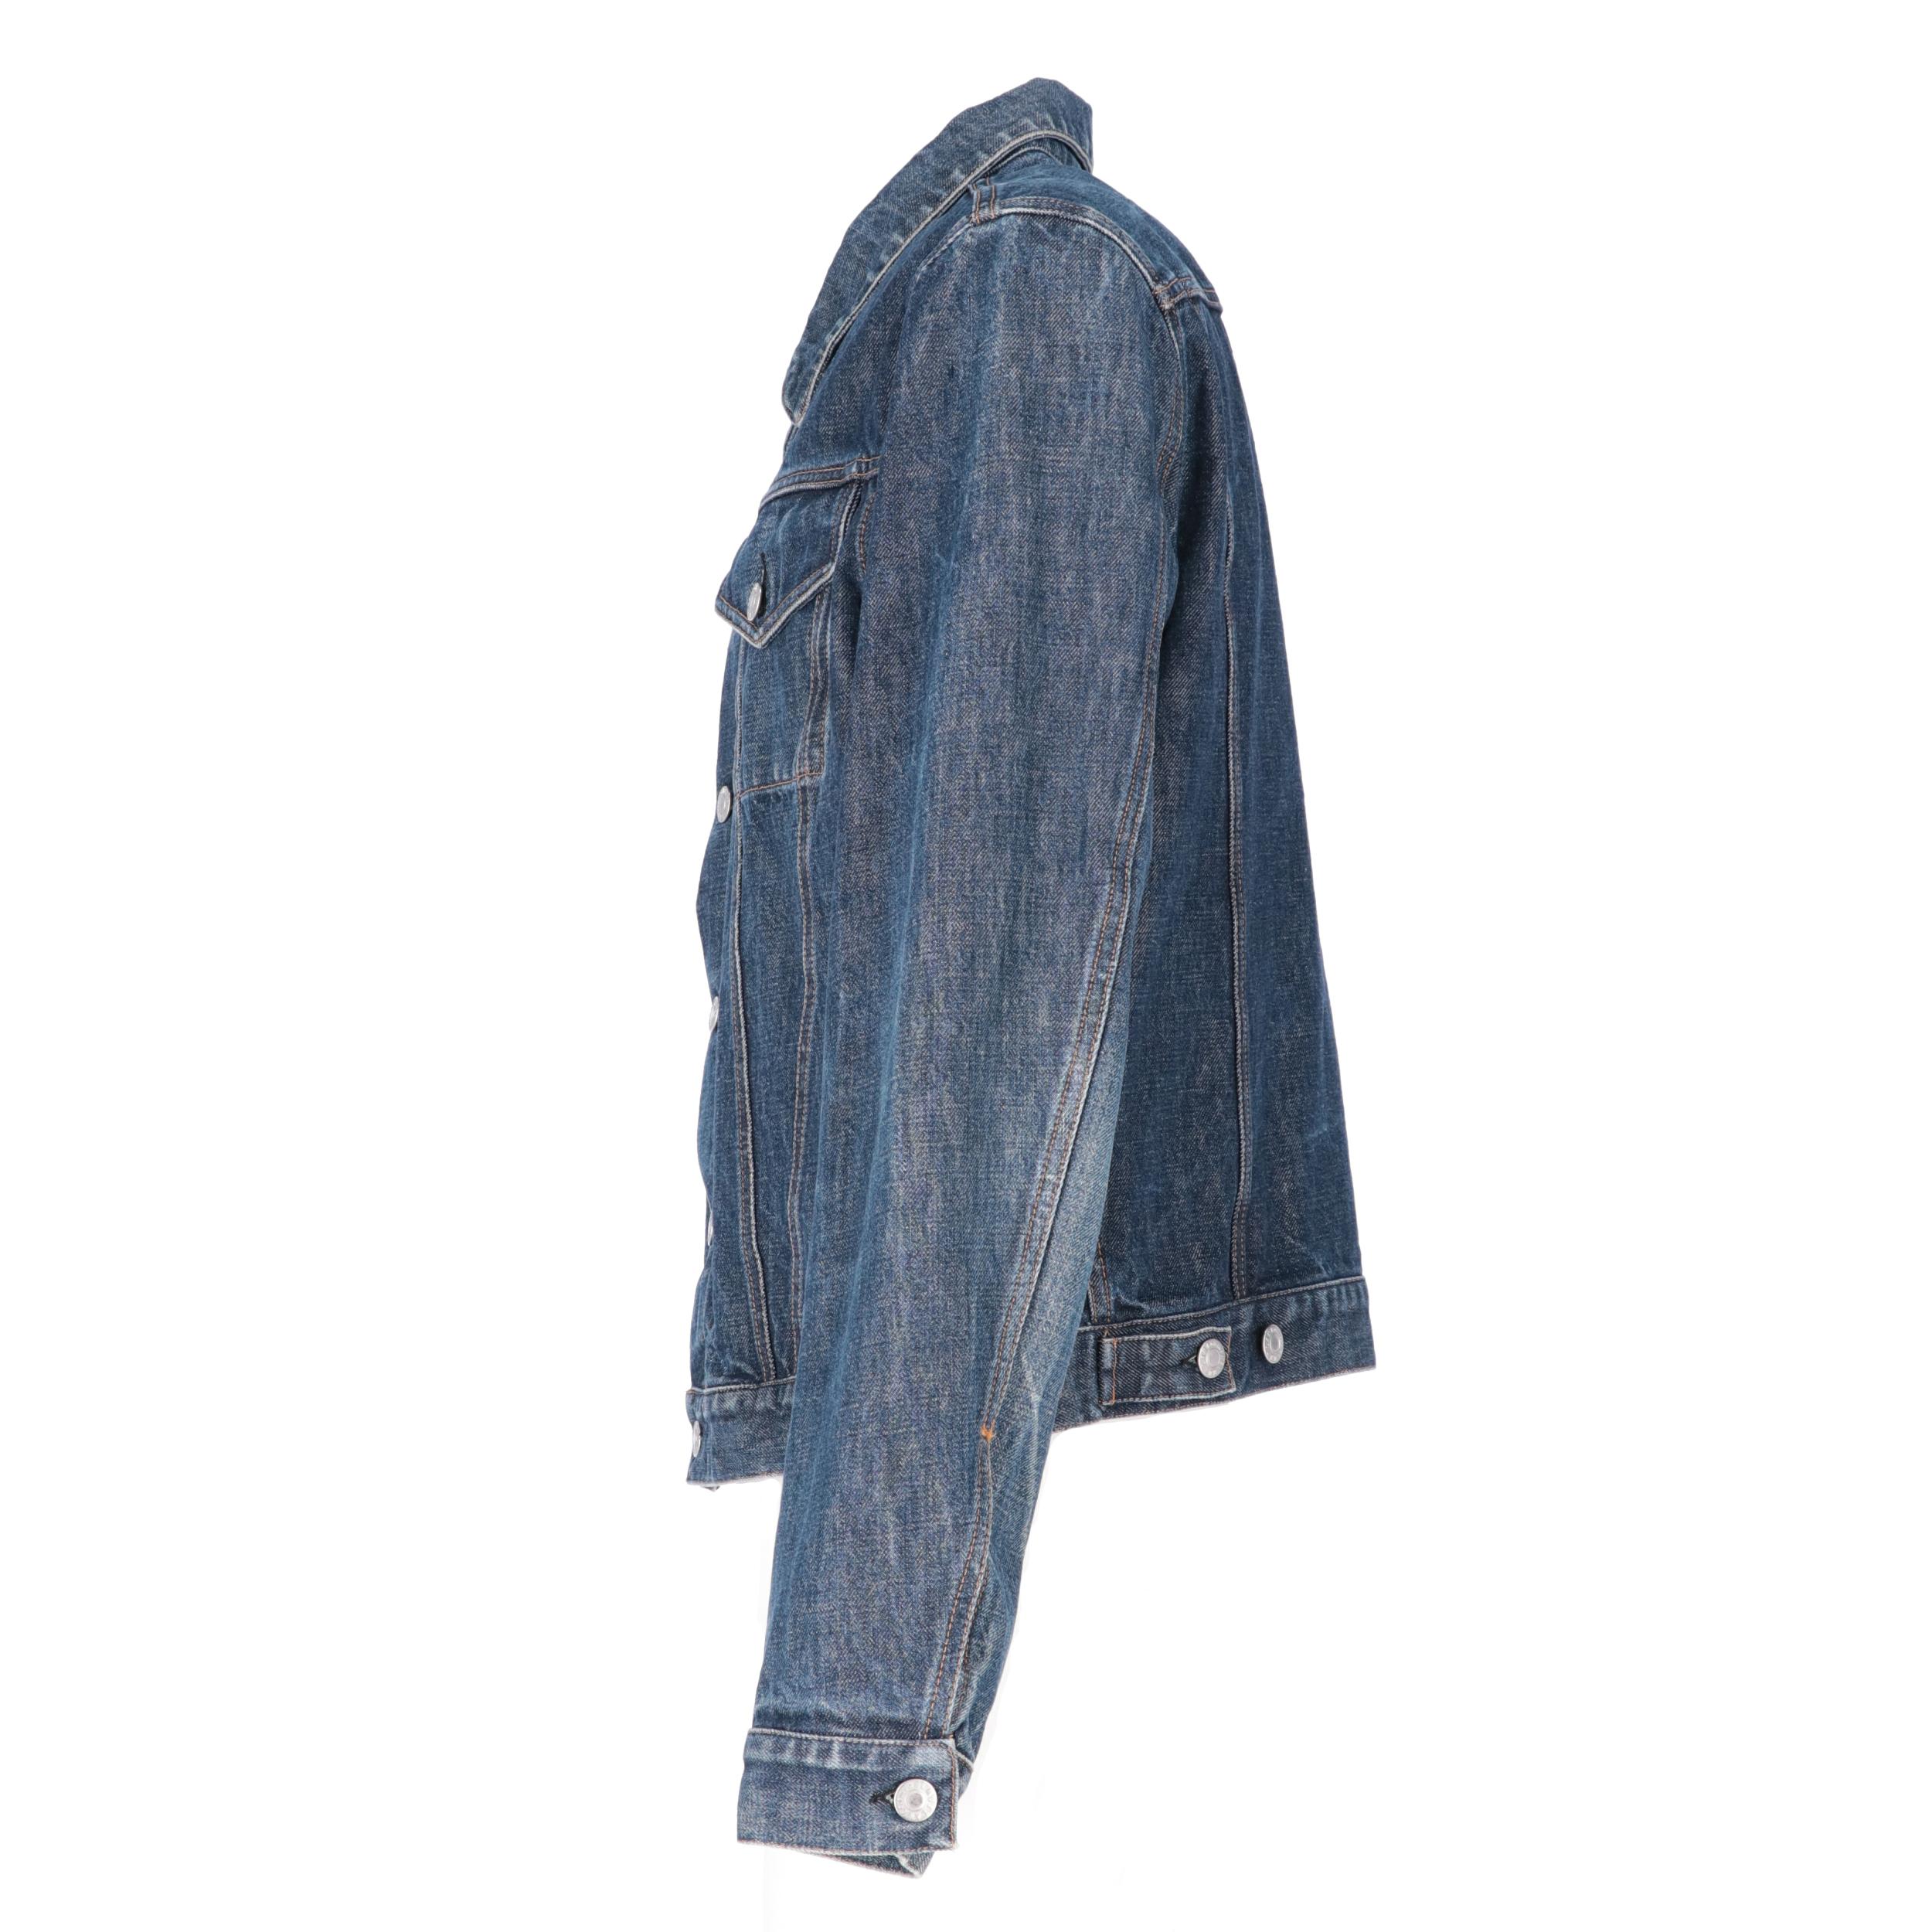 Helmut Lang blue denim jacket. Classic collar, front closure with logoed metal buttons, cuffs with button and two front pockets with flap and button.
Years: 90s

Size: 50 IT

Flat measurements

Height: 58 cm
Bust: 54 cm
Shoulders: 48 cm
Sleeves: 66